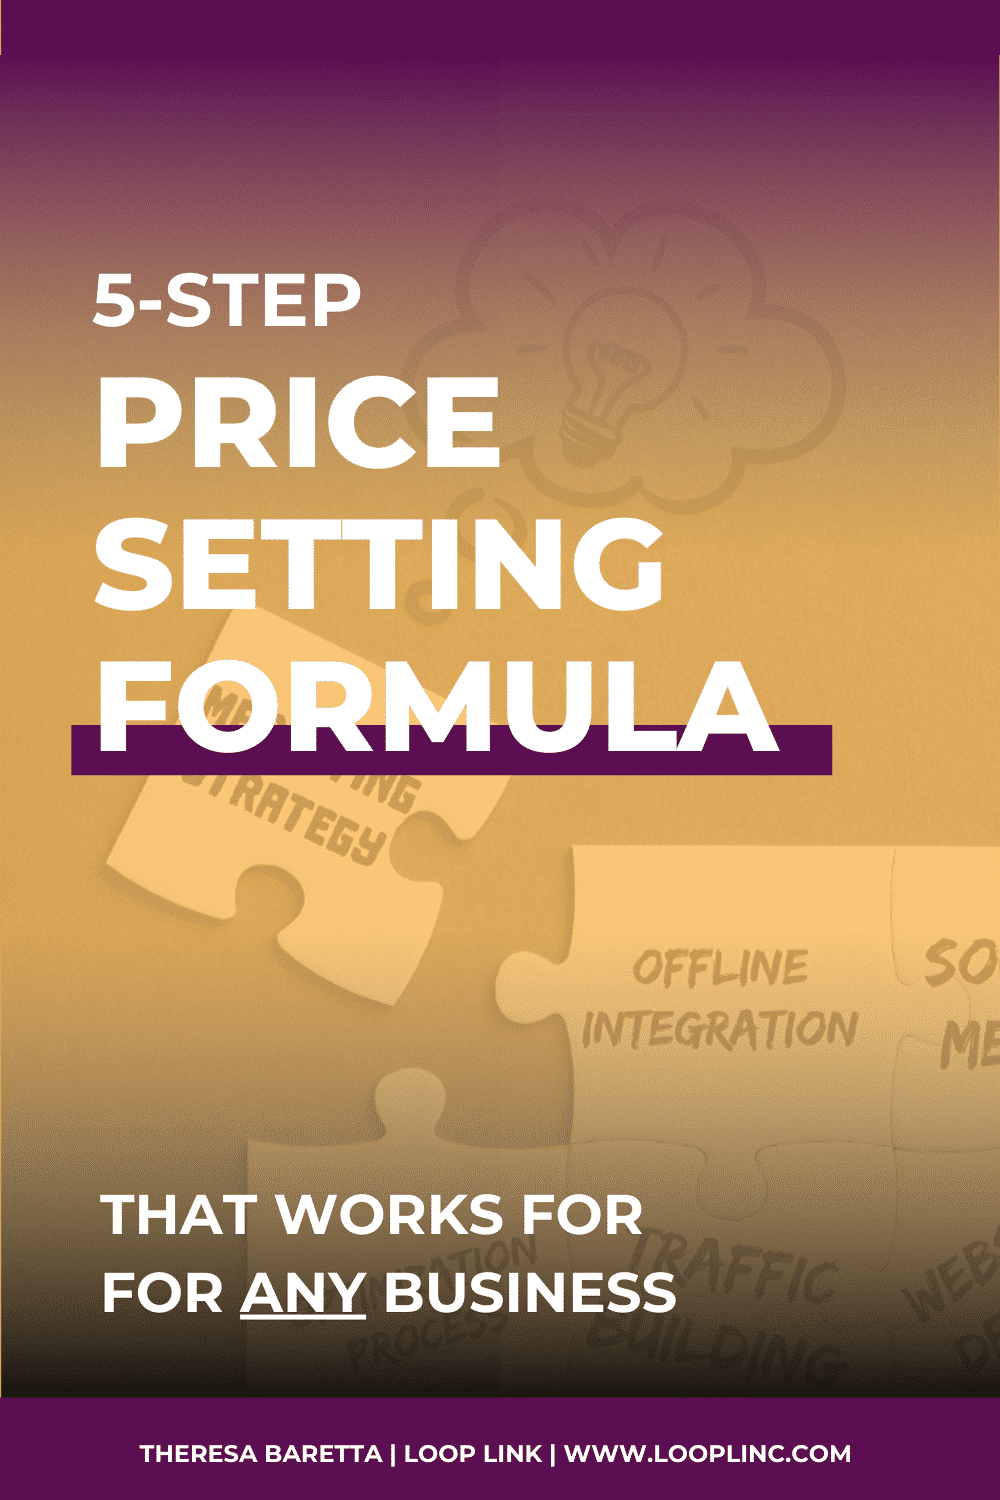 The 5-Step Pricing Strategy that will work with any business